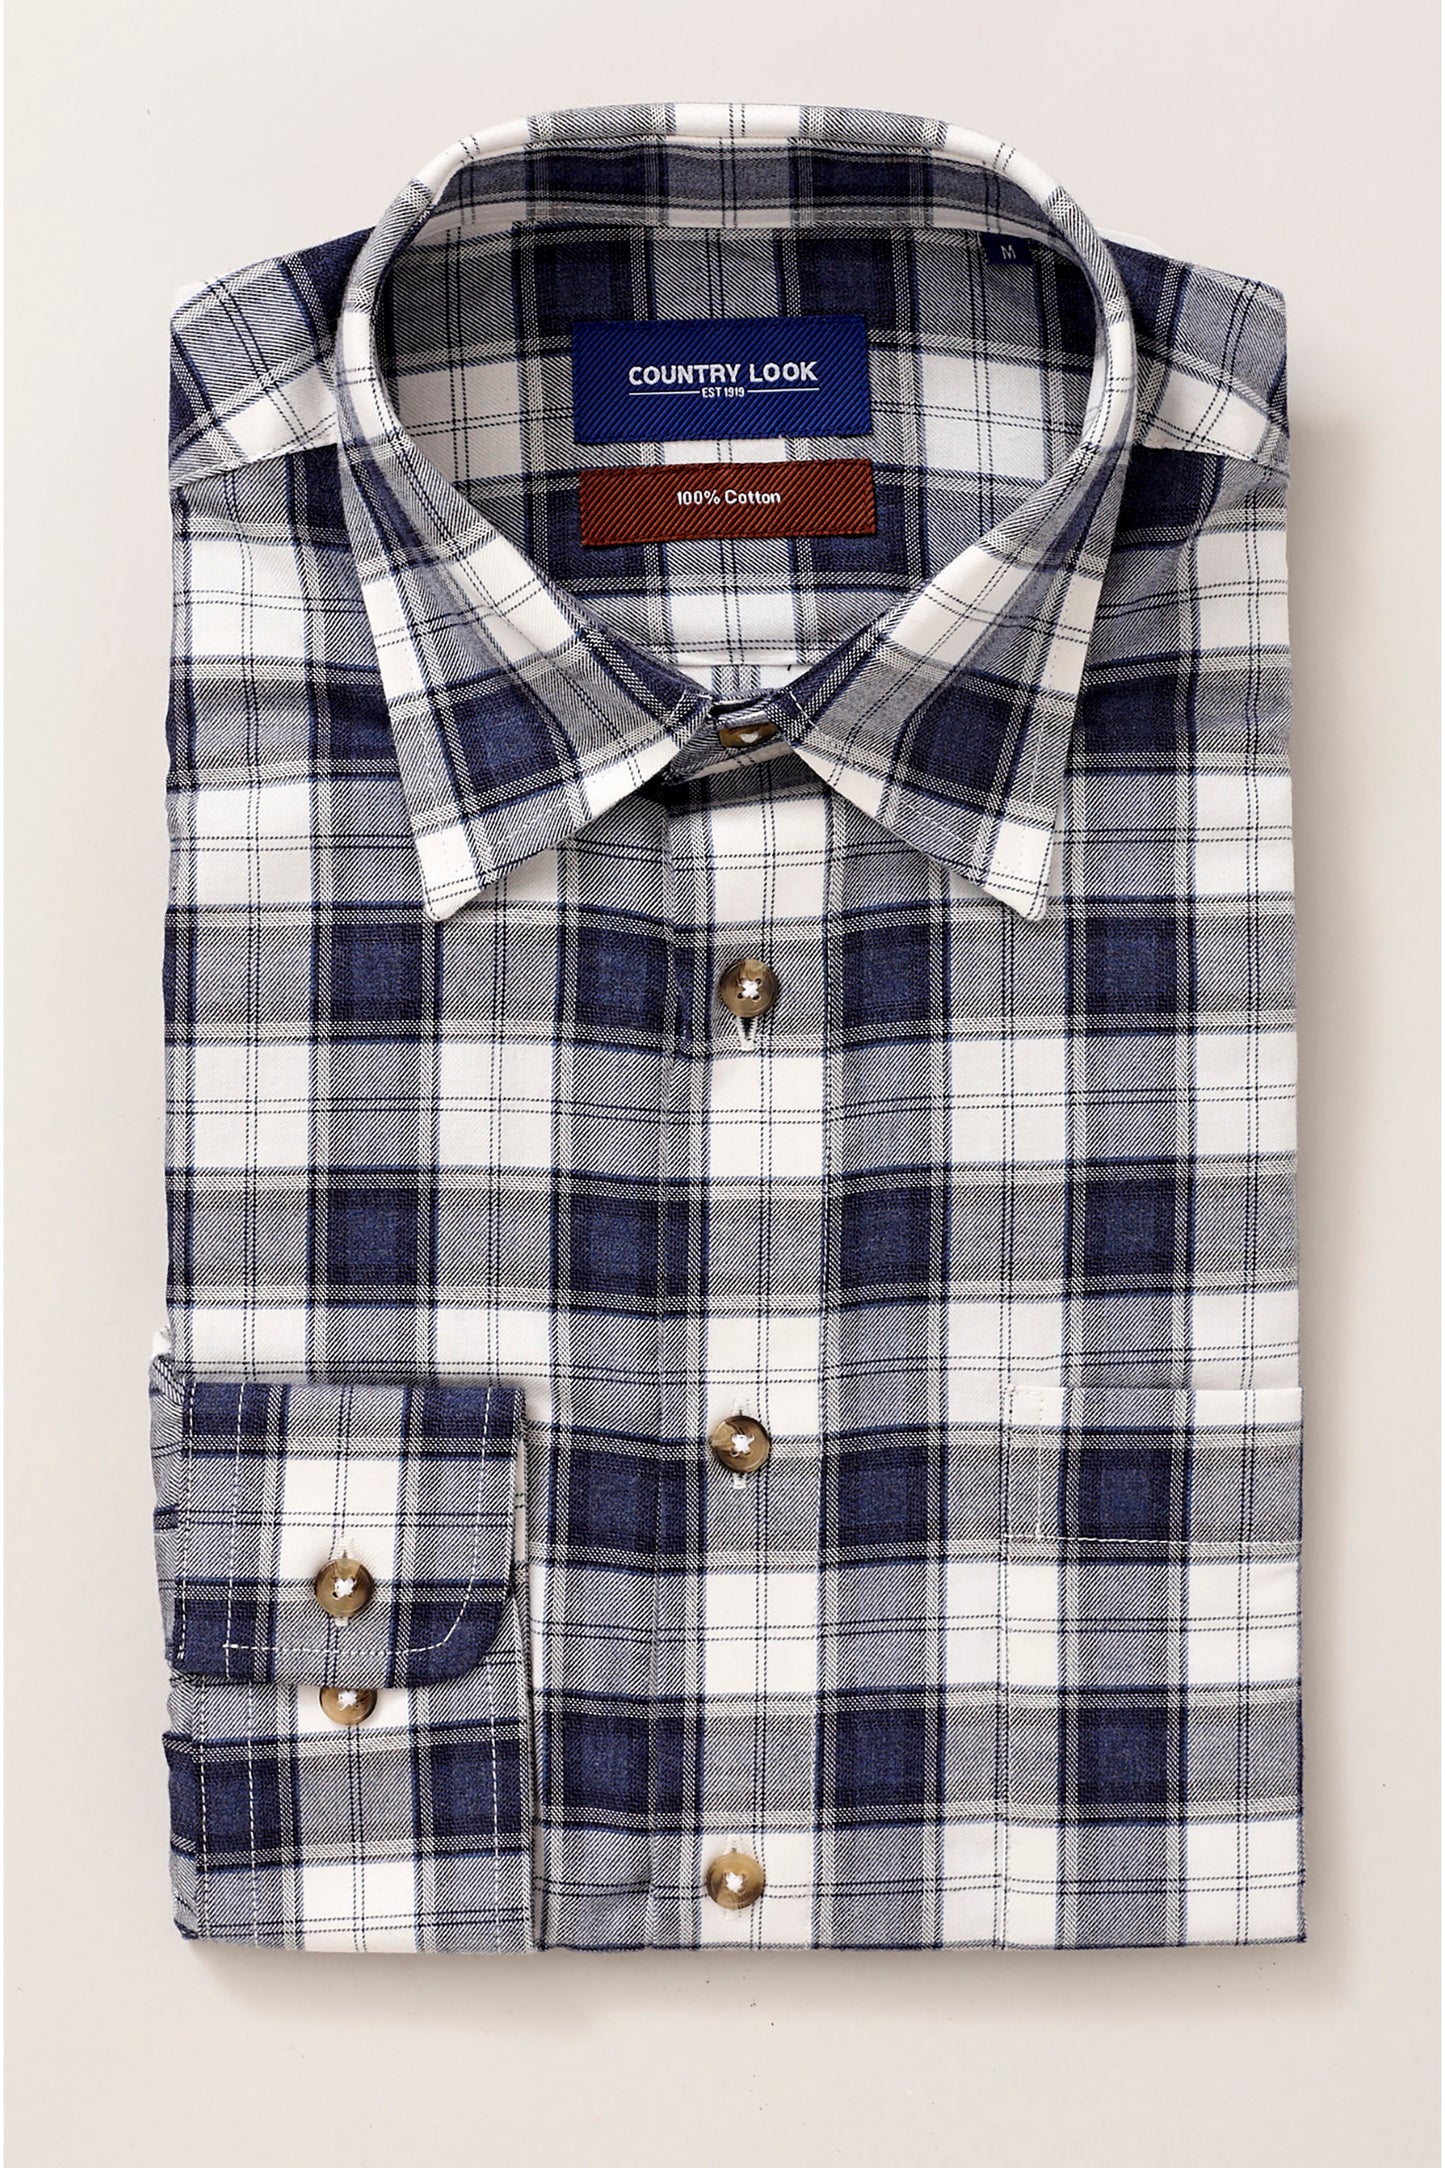 Country Look - Romney Winter Weight Shirt - Navy Check